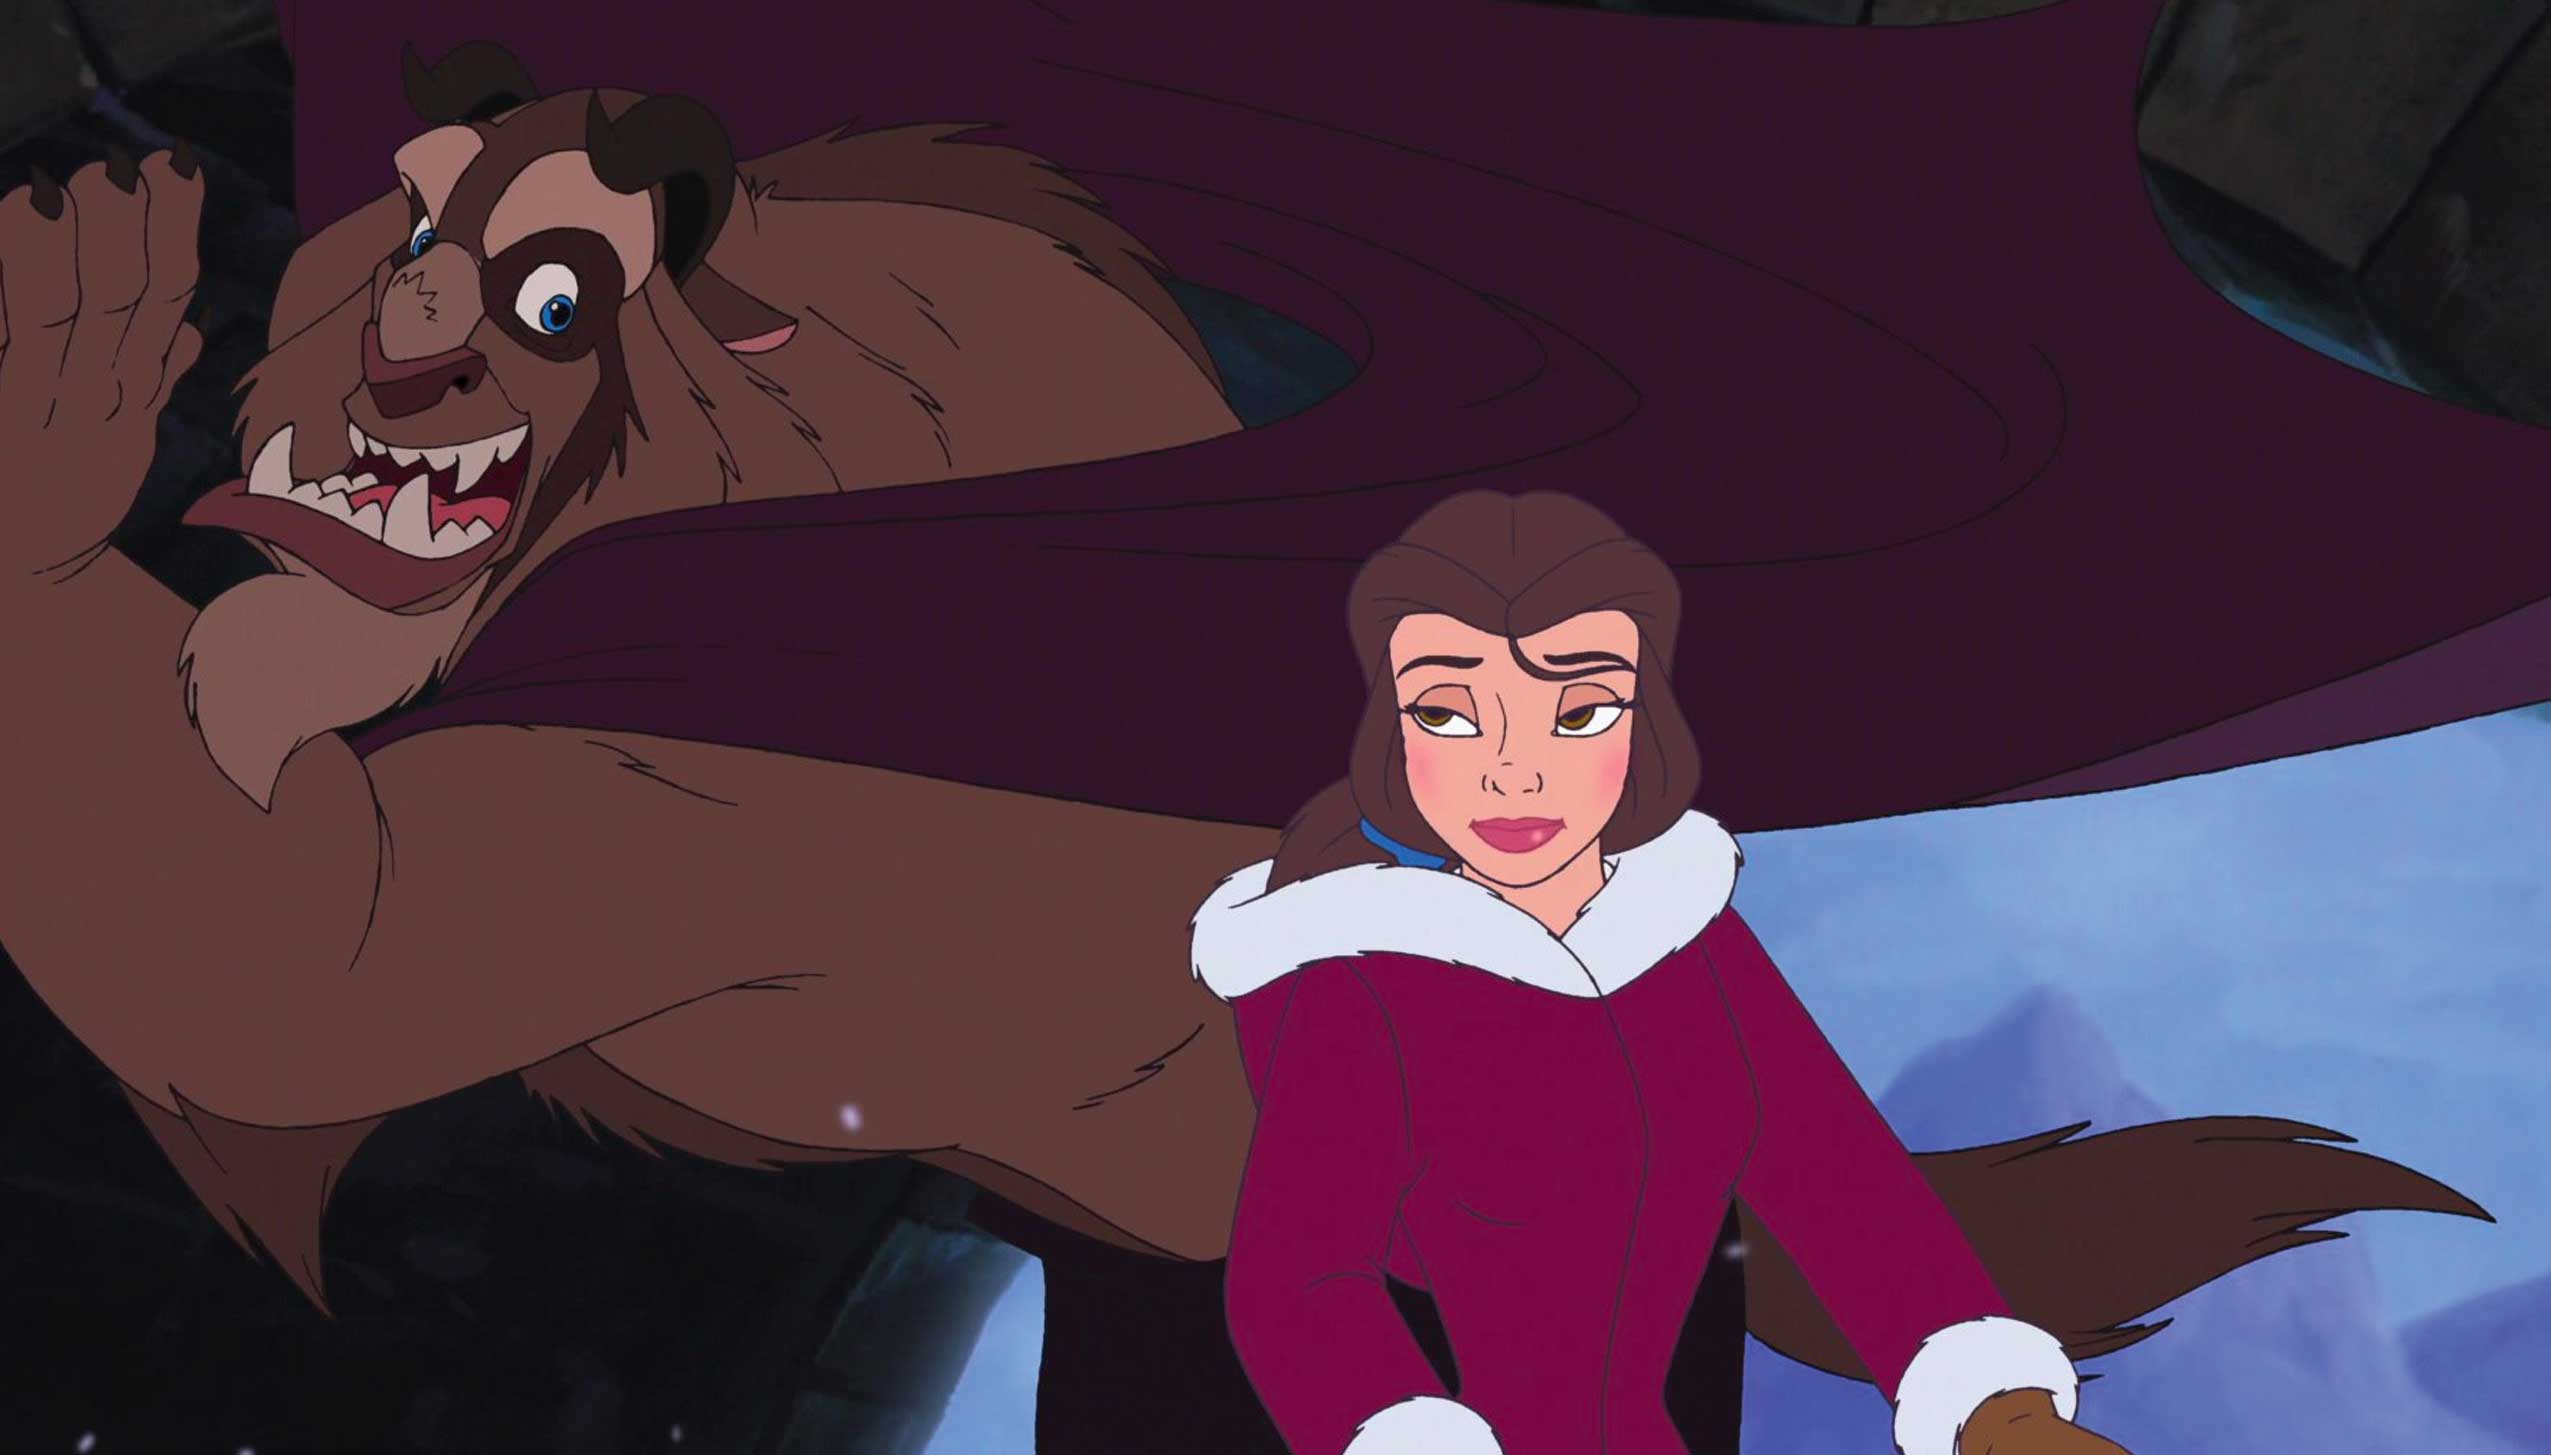 A scene from Beauty and the Beast: The Enchanted Christmas